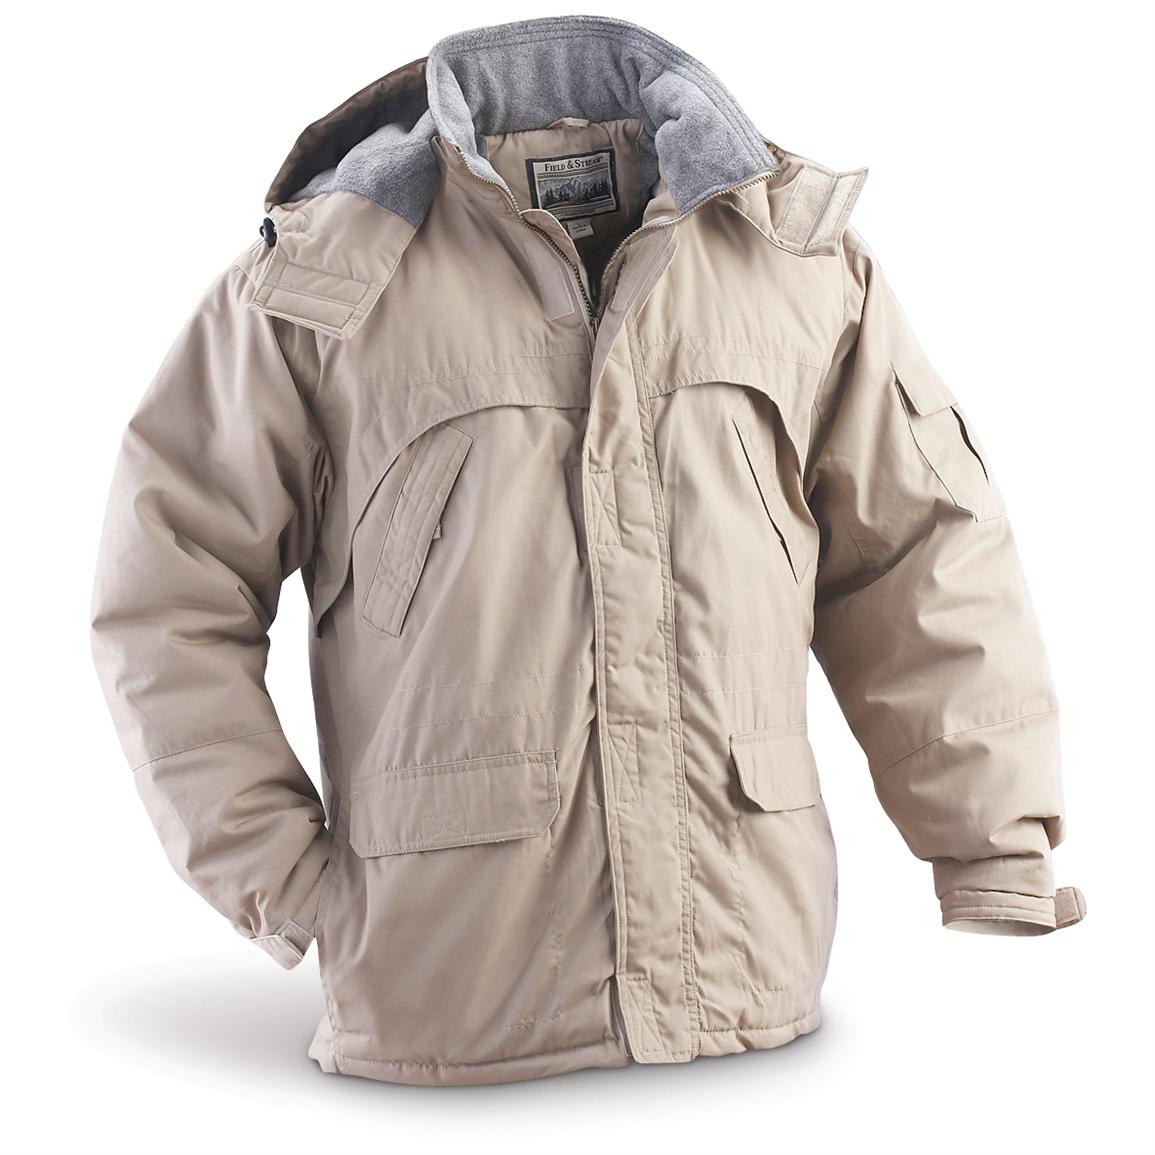 Field Stream Hooded Parka 129262 Insulated Jackets Coats in Fantastic Field & Stream Clothing